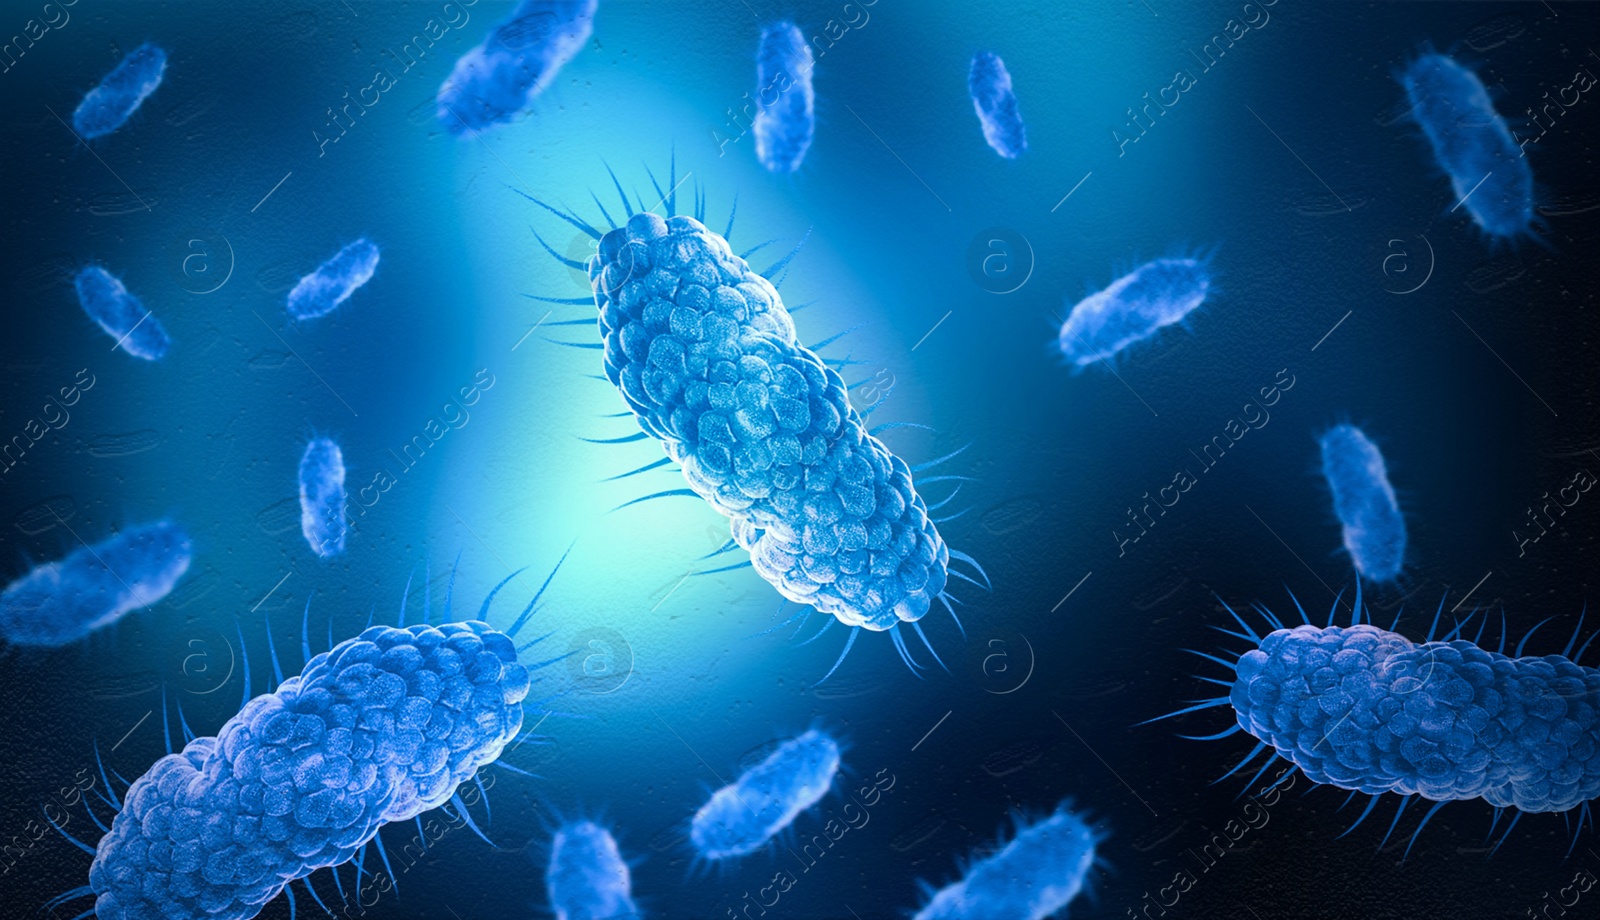 Image of Bacteria colony under microscope, illustration. Laboratory research